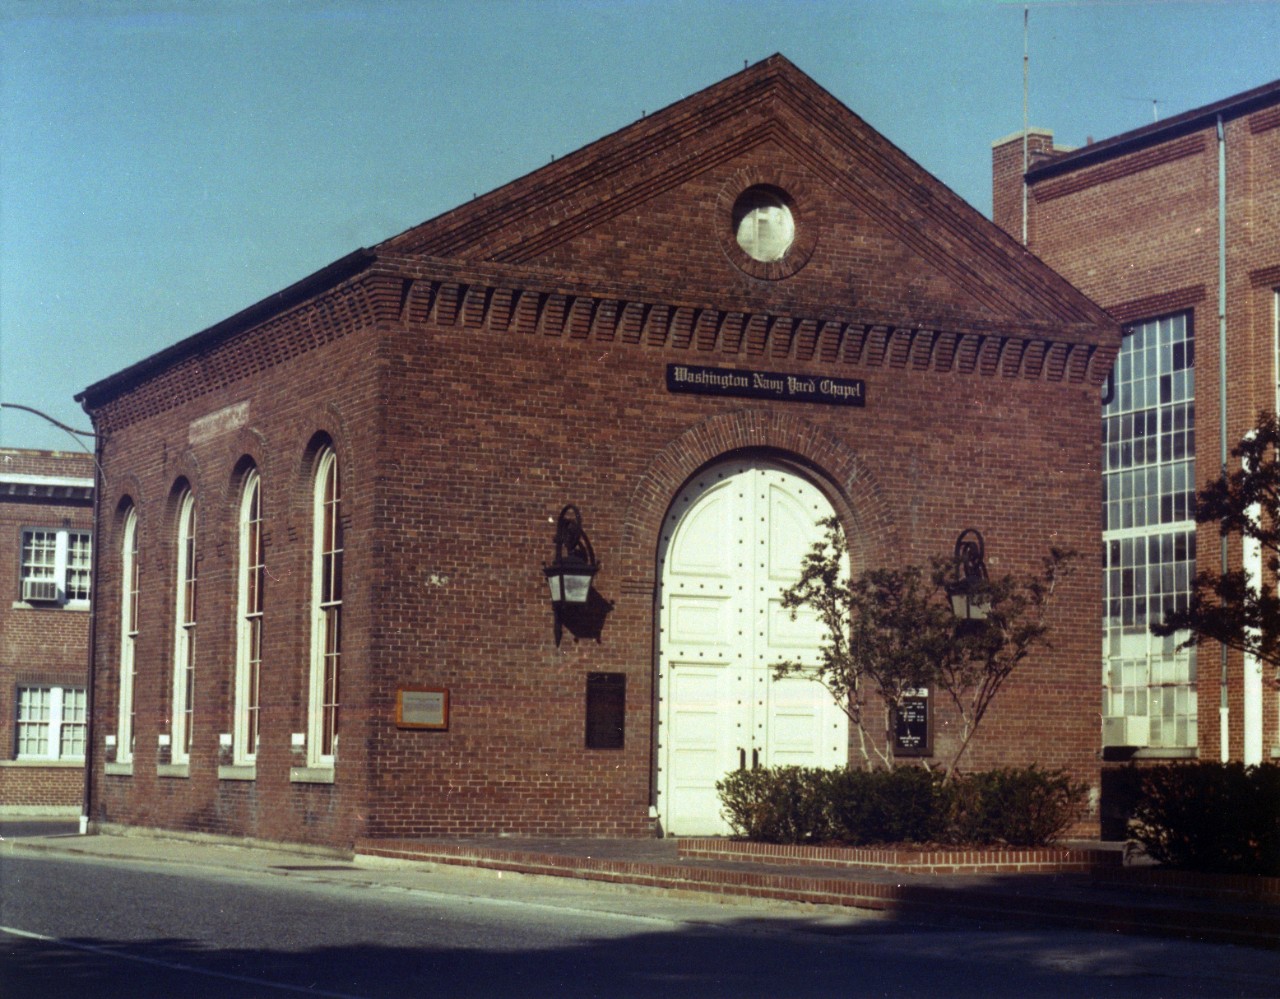 Washington Navy Yard Chapel, Building 106, built in 1901 as a pumping station for the forge shop. In 1973, it was renovated, largely with volunteer labor and resources, to serve as the Navy Yard Chapel. Photo circa mid-1970's.